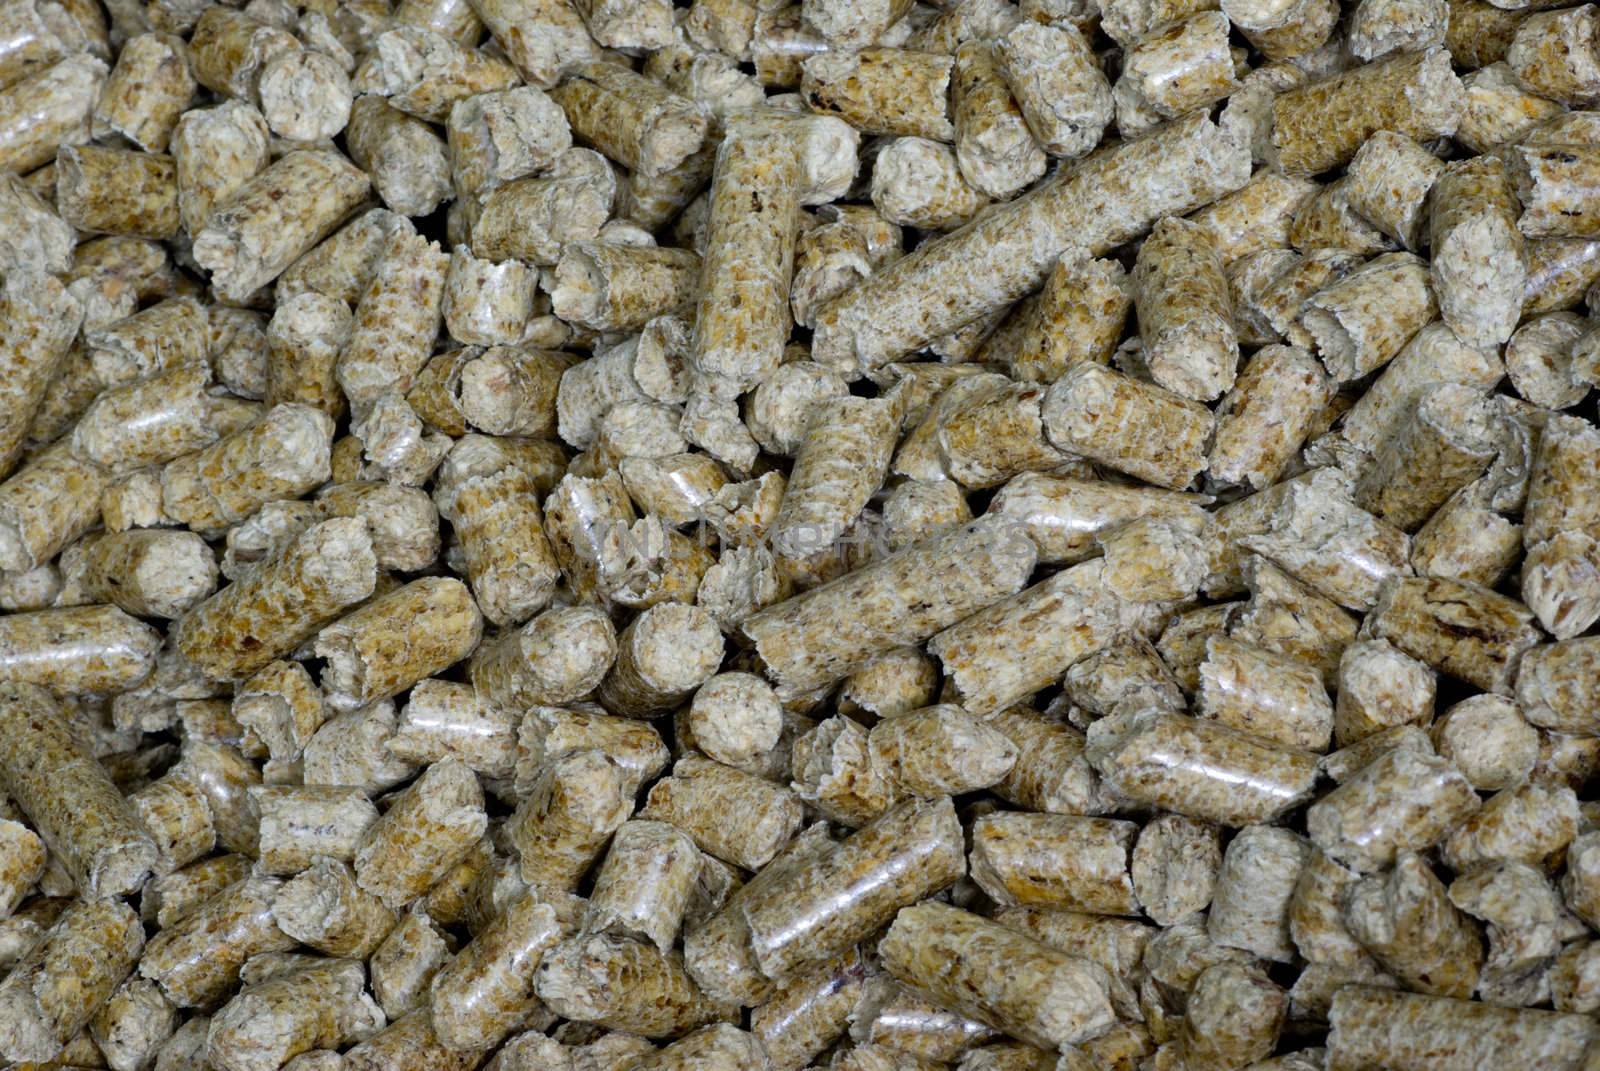 Lots of pellets for heating, ecological alternative to oil and coal.